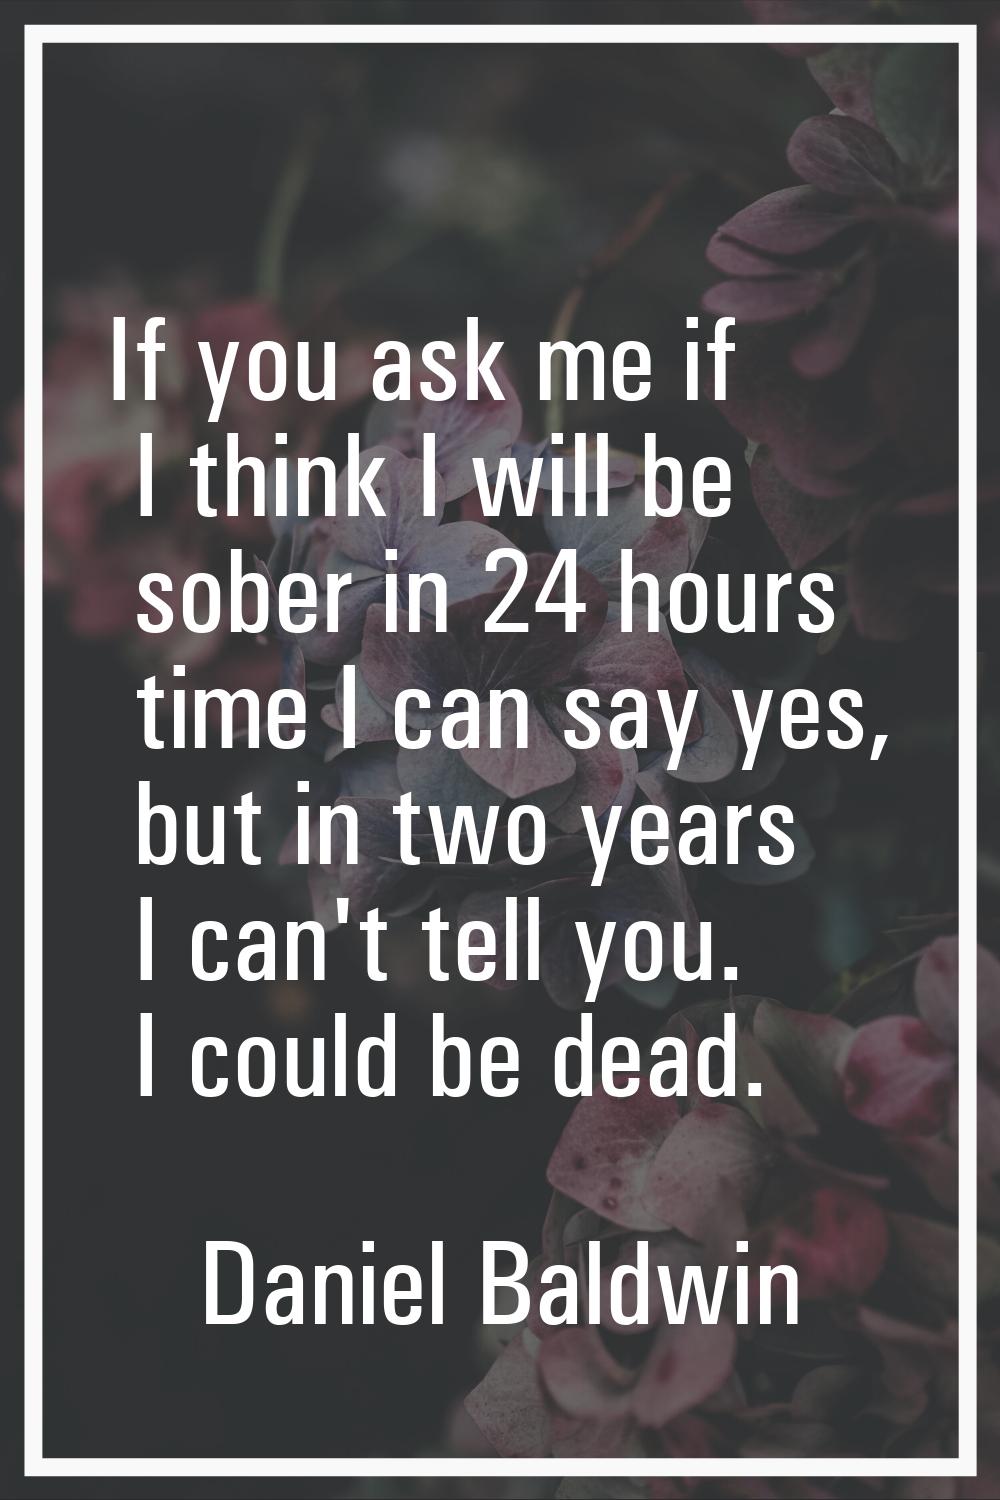 If you ask me if I think I will be sober in 24 hours time I can say yes, but in two years I can't t